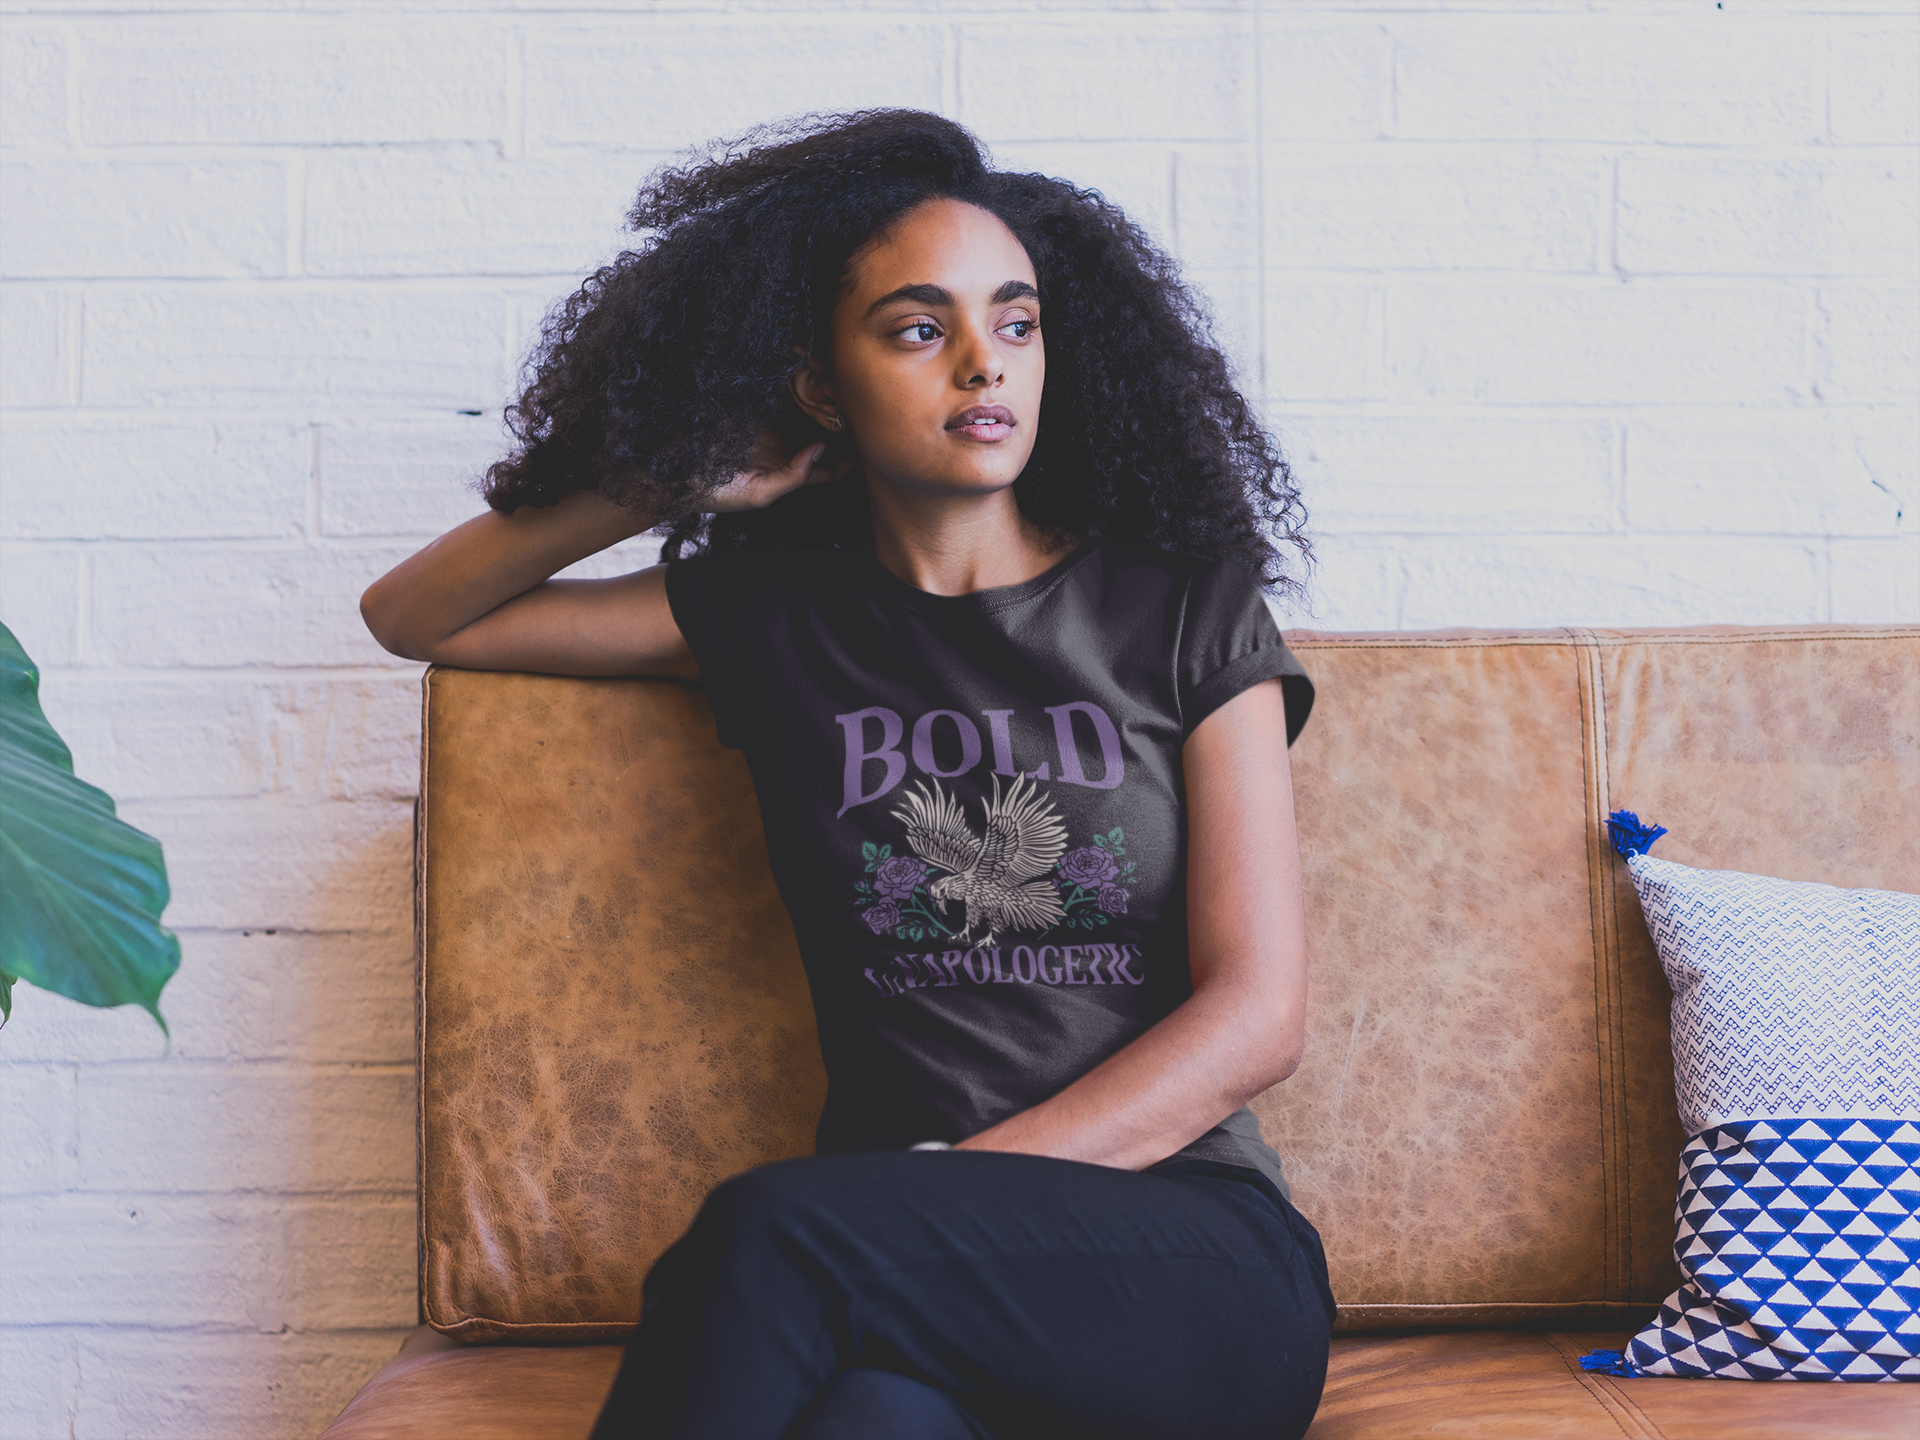 Bold and Unapologetic Dreamy Short Sleeve Tee - Yoga Bitch